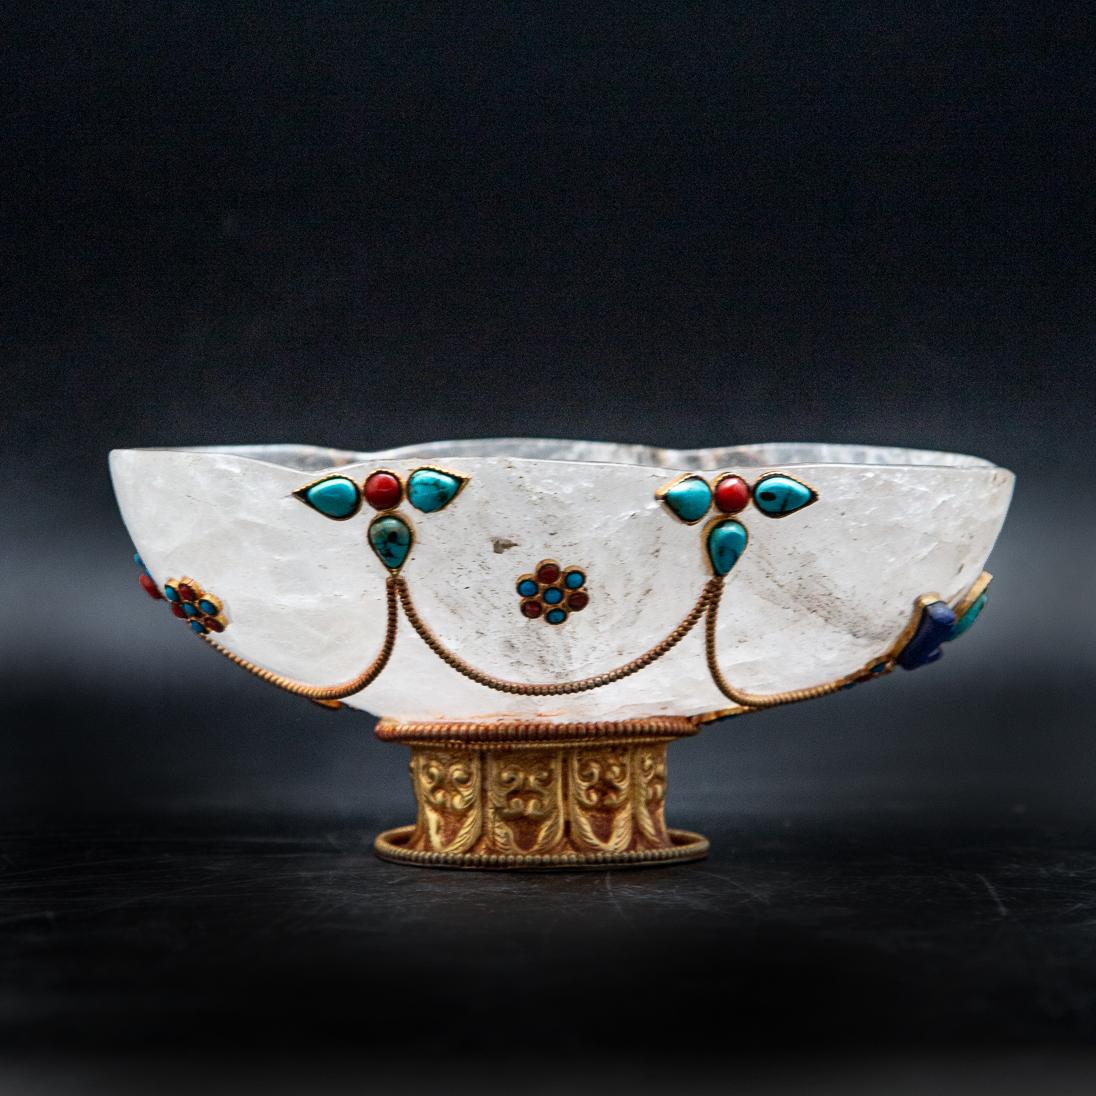 Rock crystal carved footed bowl with turquoise and coral. Rock crystal carved bowl with applied stones of coral, turquoise, and lapis lazuli set in gilt metal. Handcrafted in Nepal. Measures: 6